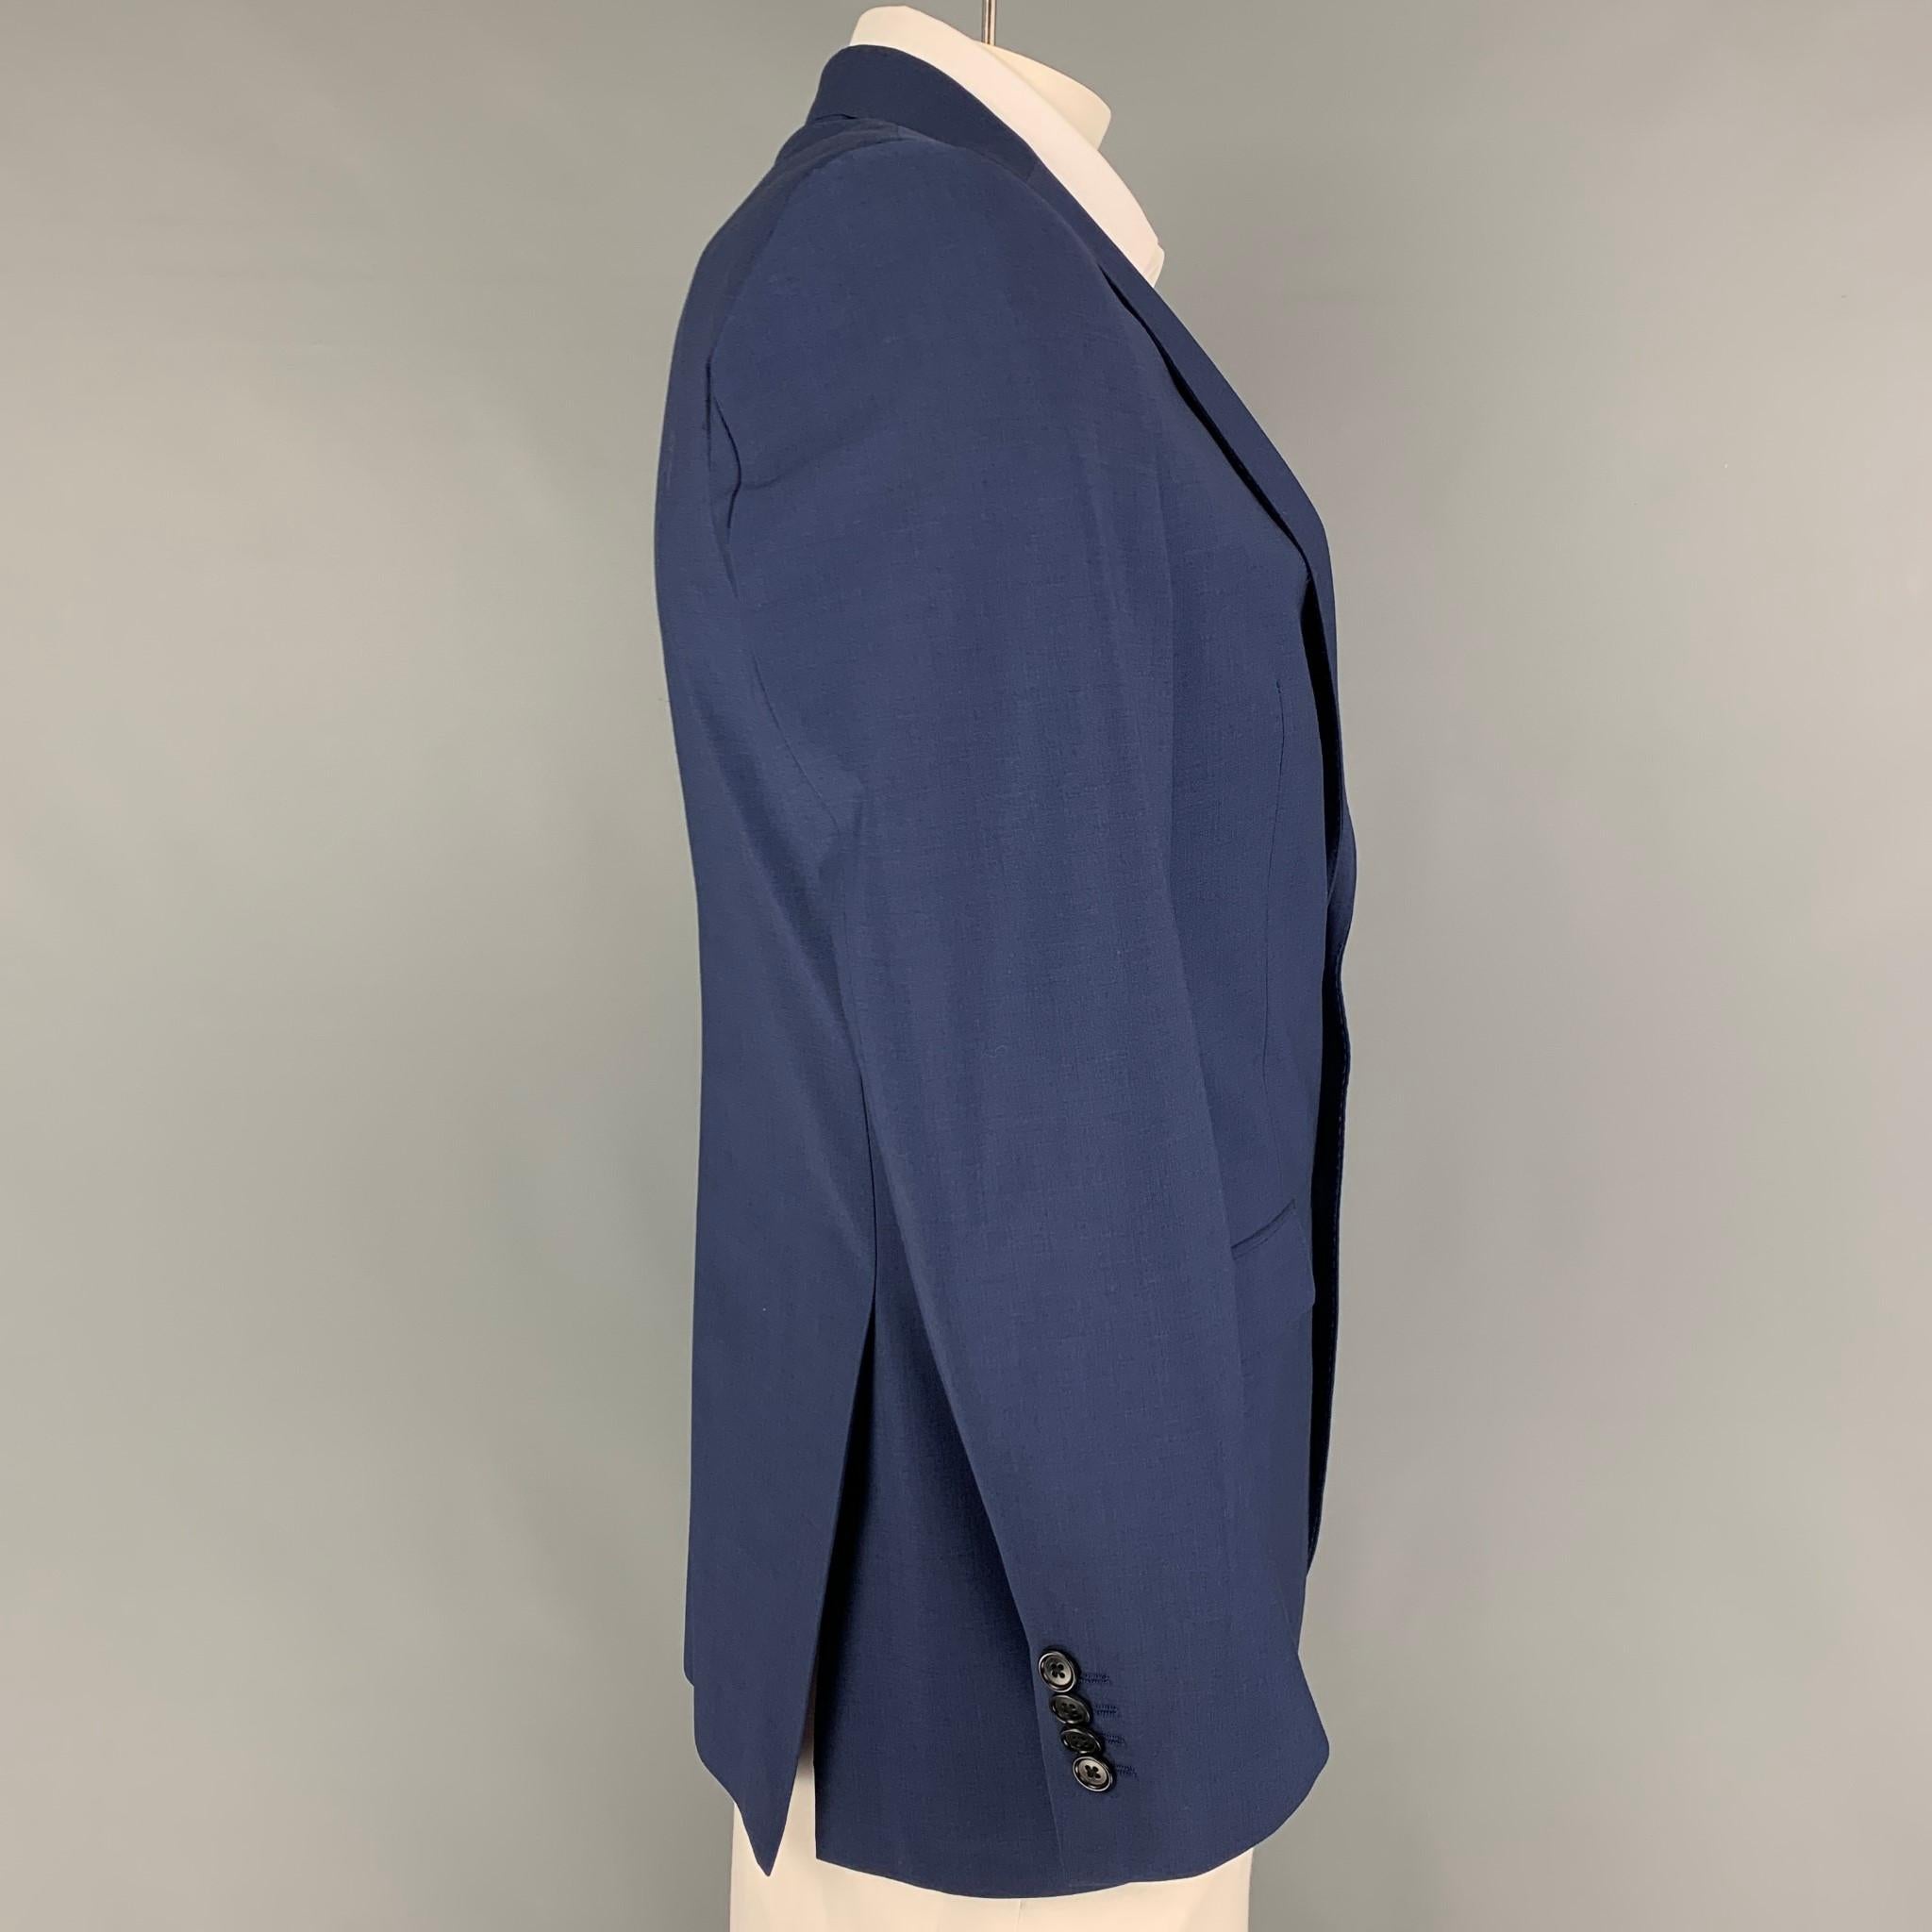 JOHN VARVATOS *U.S.A sport coat comes in a blue wool with a full liner featuring a notch lapel, flap pockets, double back vent, and a double button closure. 

Very Good Pre-Owned Condition.
Marked: 40 R

Measurements:

Shoulder: 18.5 in.
Chest: 40